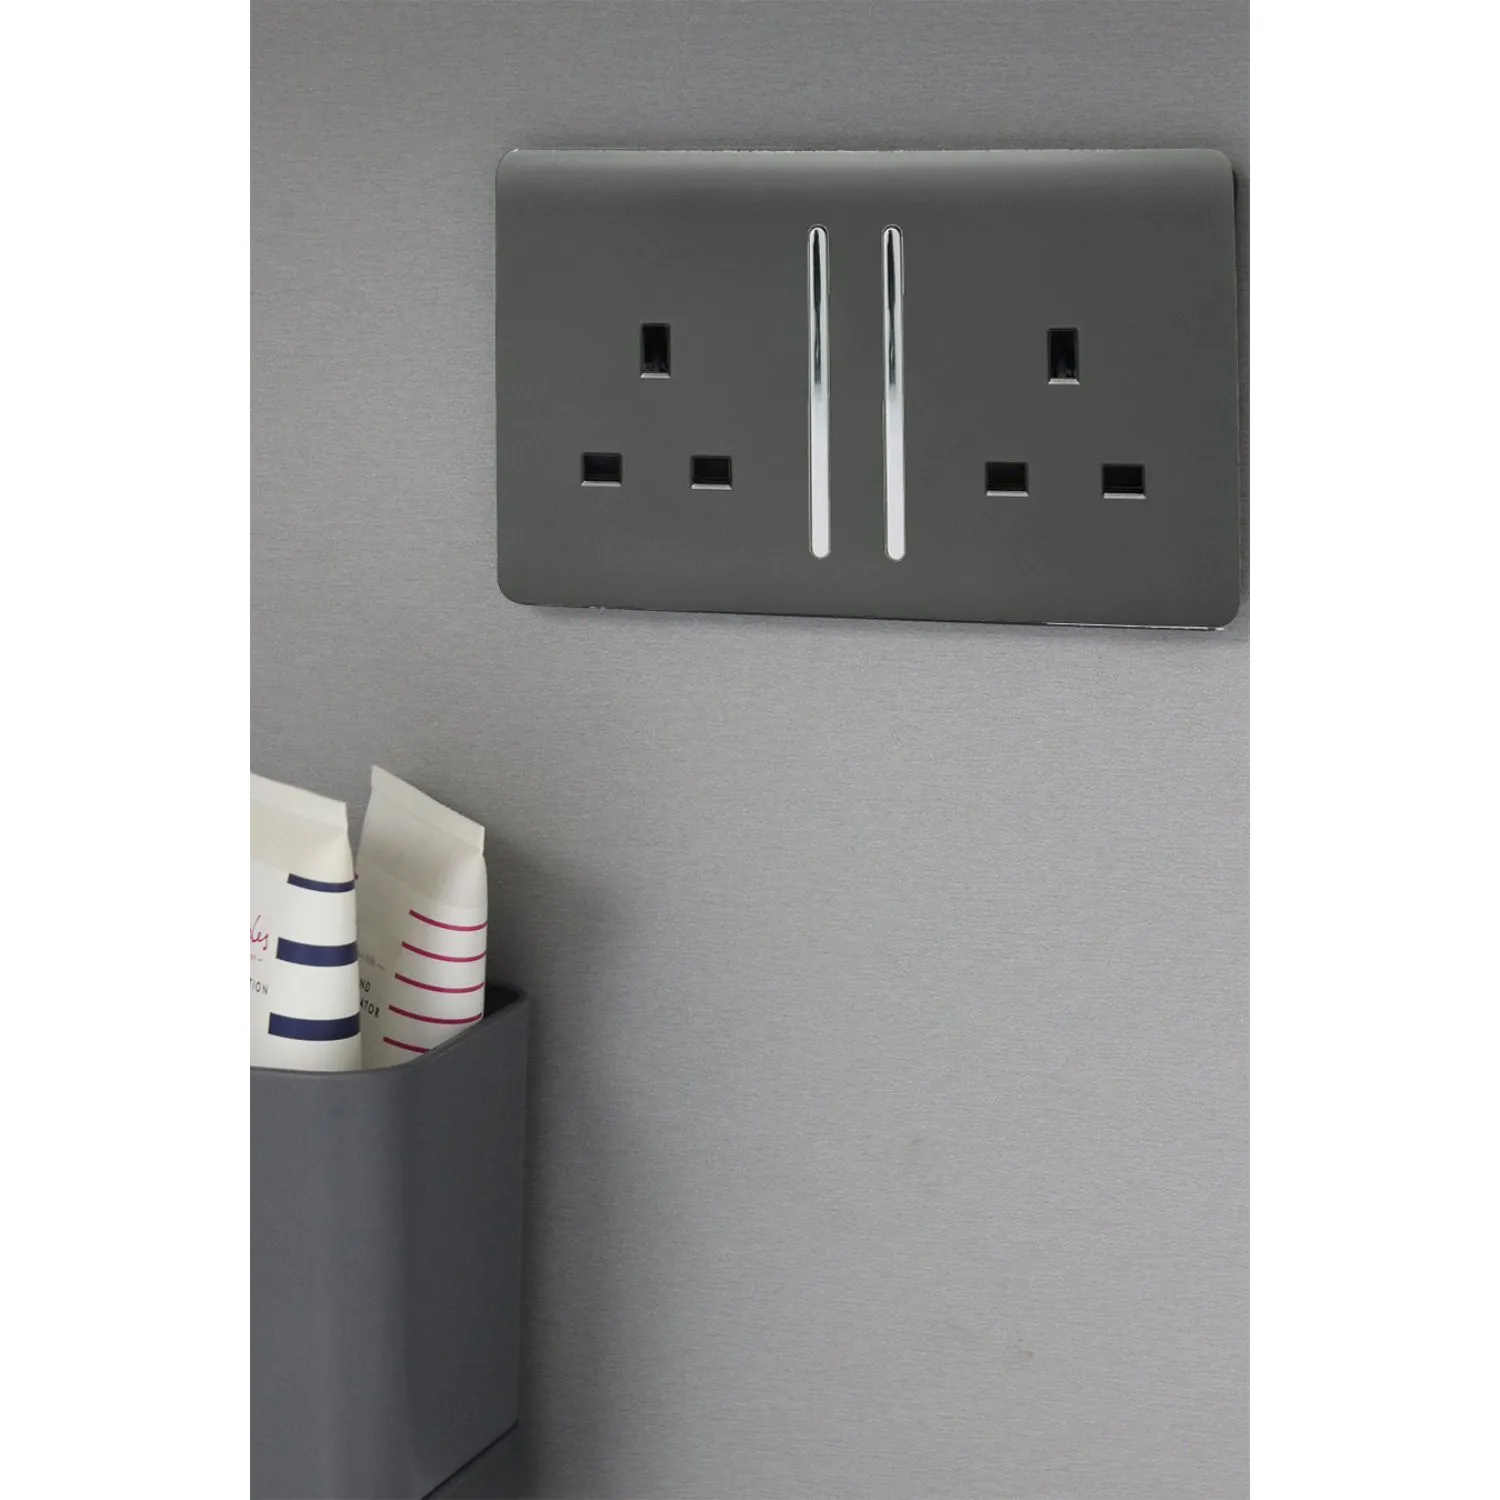 Trendi, Artistic Modern 2 Gang 13Amp Long Switched Double Socket Chrome Rocker Charcoal Finish, BRITISH MADE, (25mm Back Box Required), 5yrs Warranty